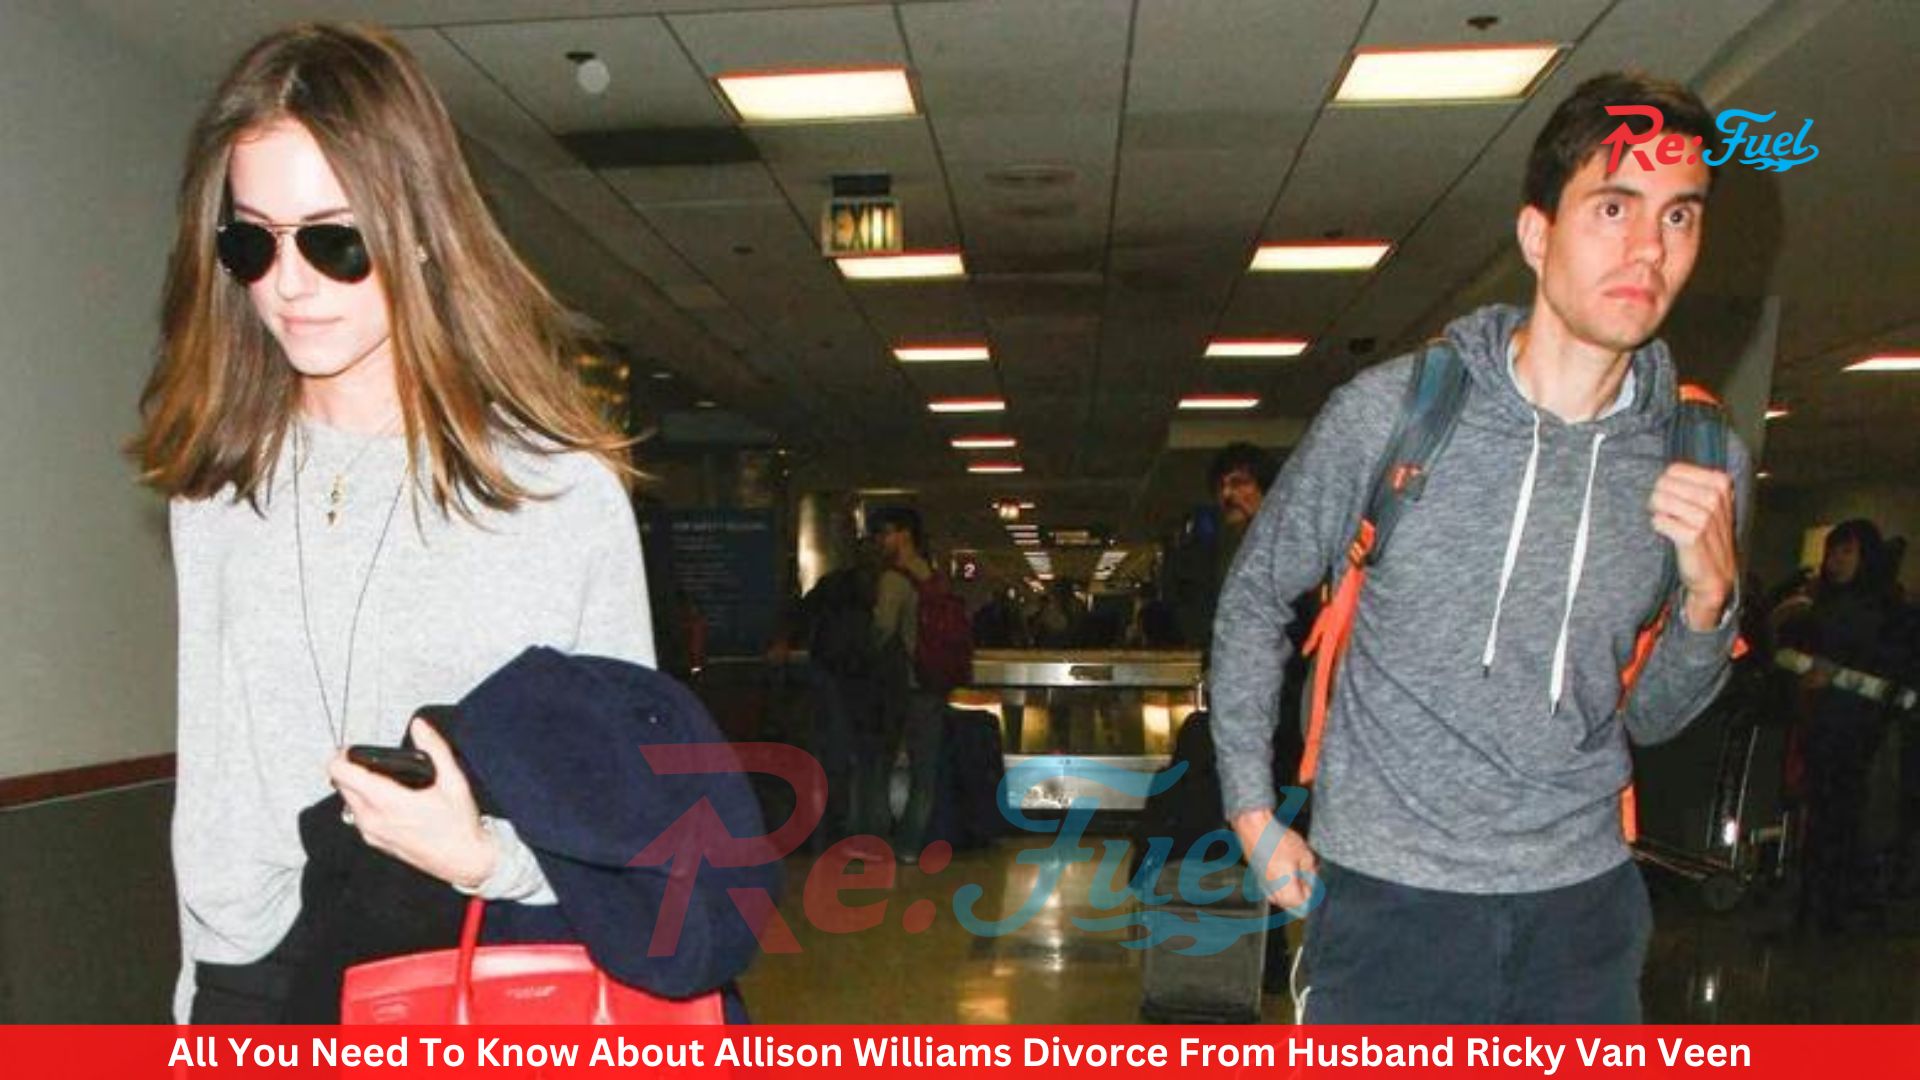 All You Need To Know About Allison Williams Divorce From Husband Ricky Van Veen